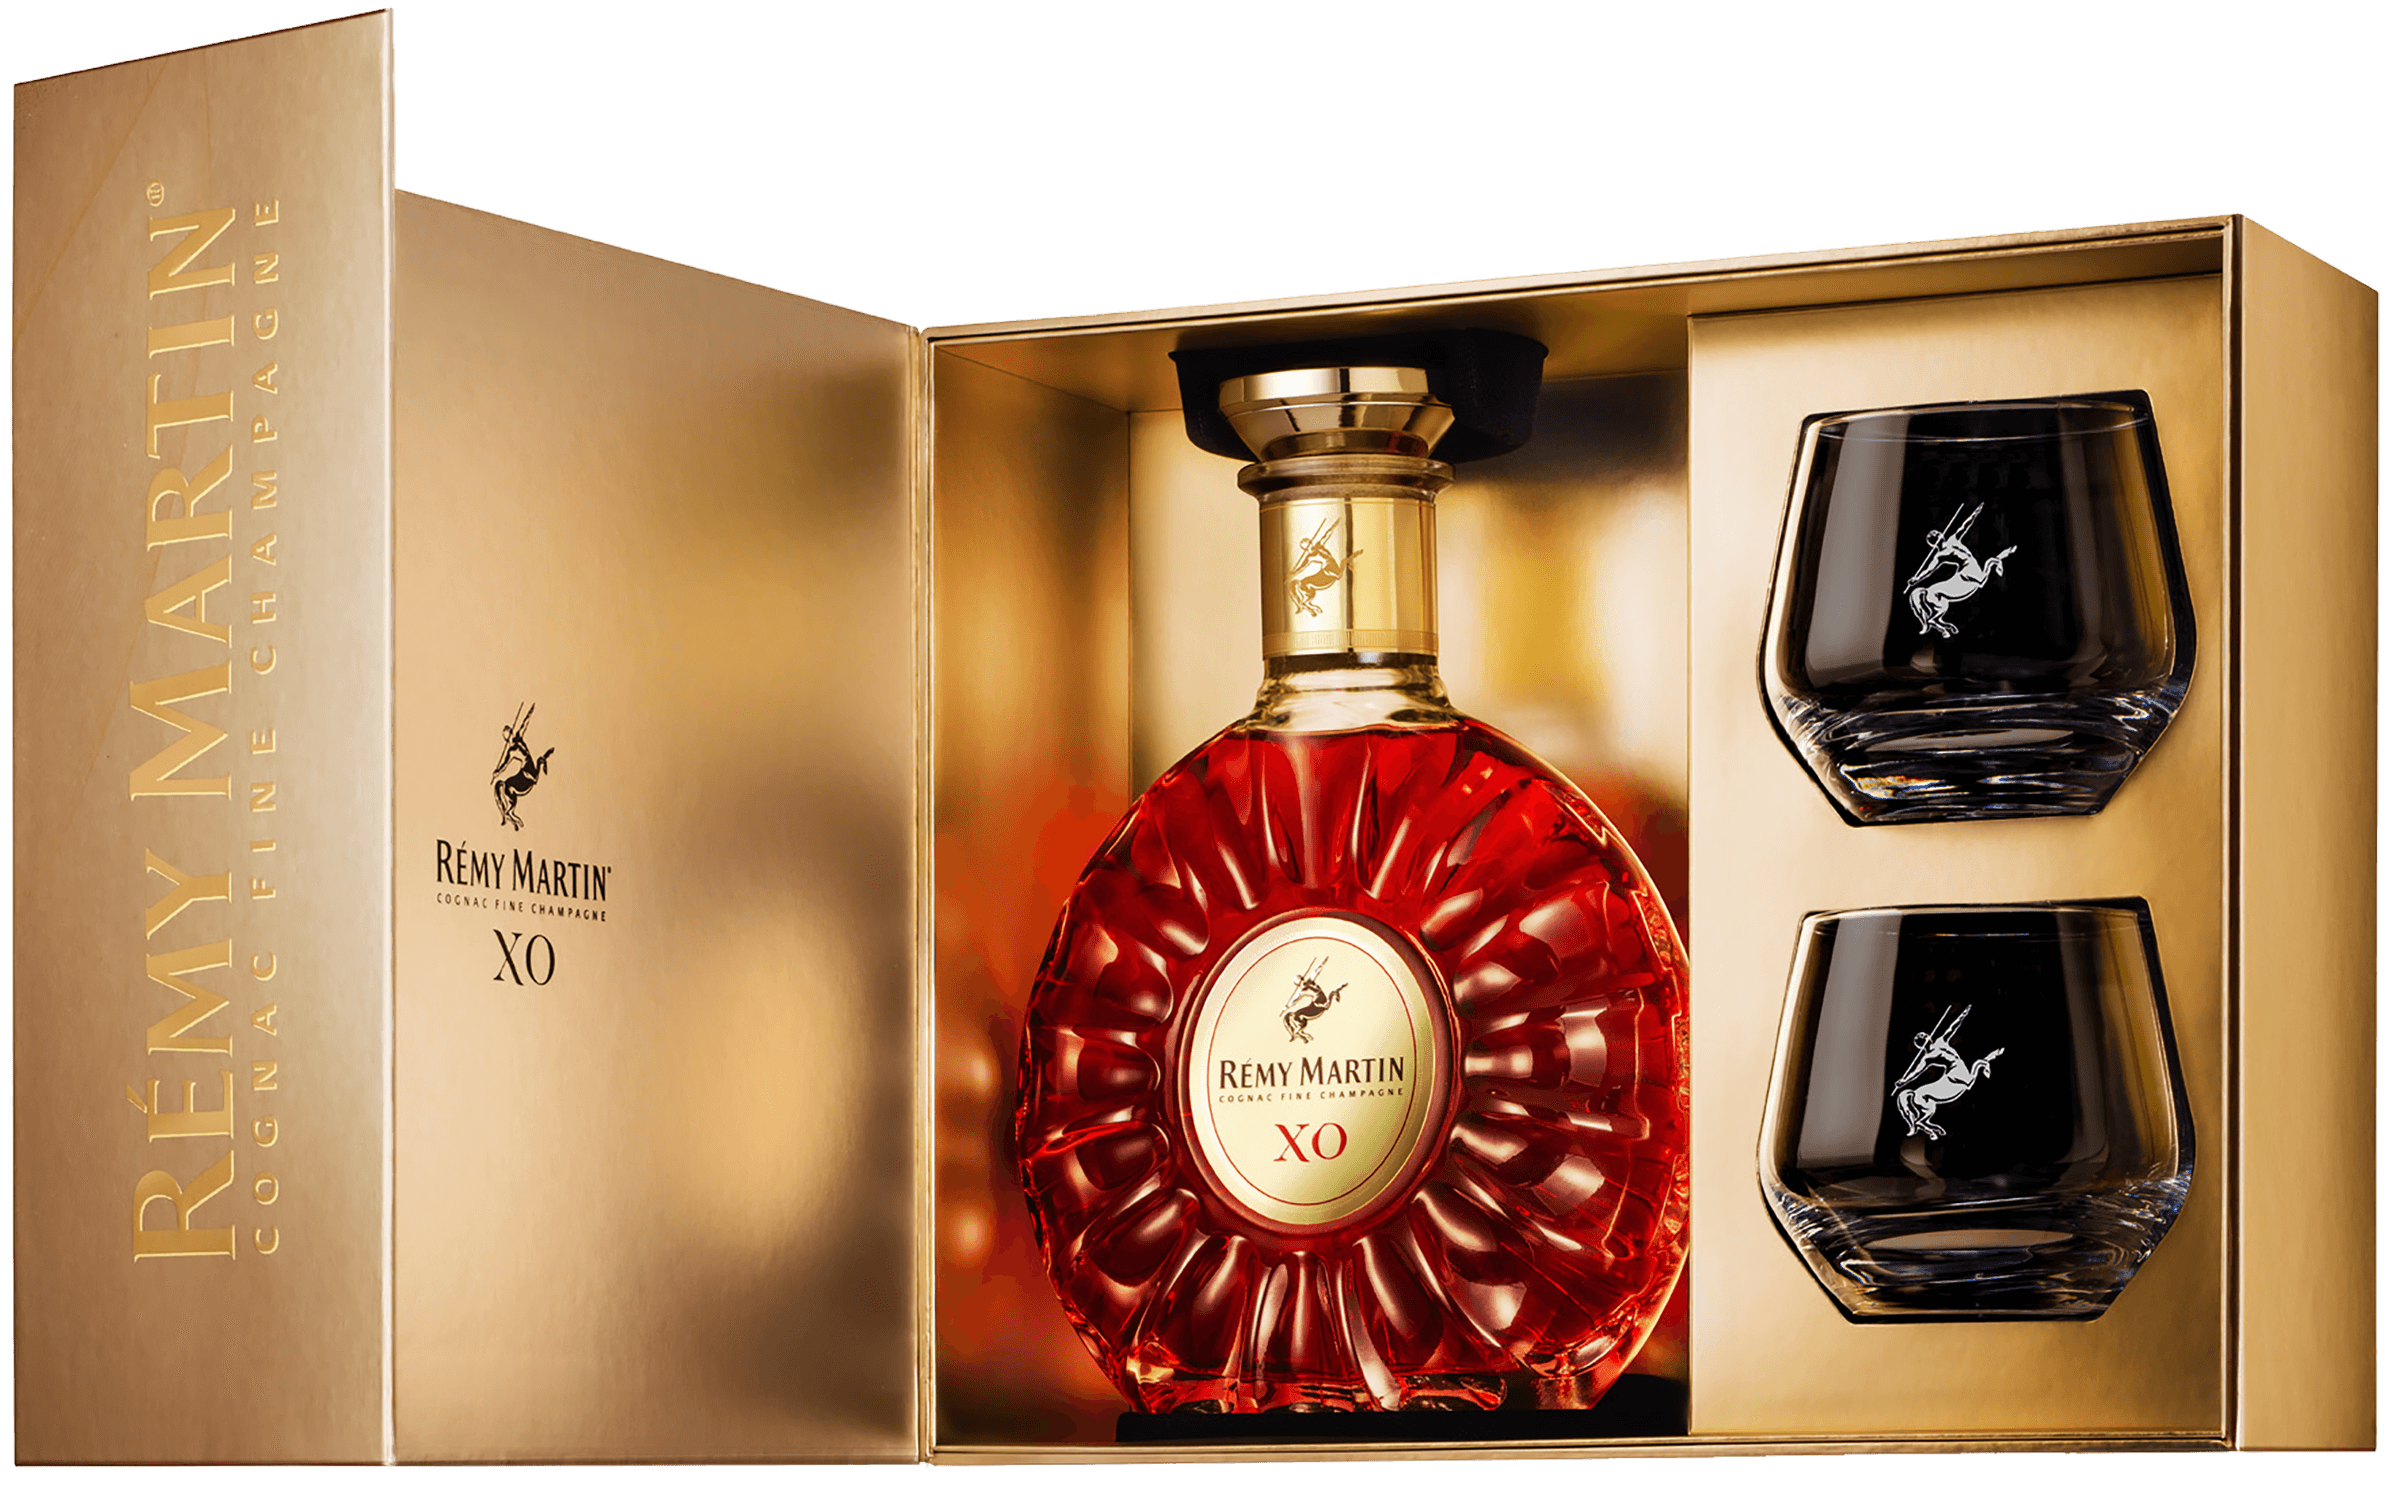 metaxa 7 stars gift box with two glasses Rémy Martin Cognac XO (gift box with two glasses)